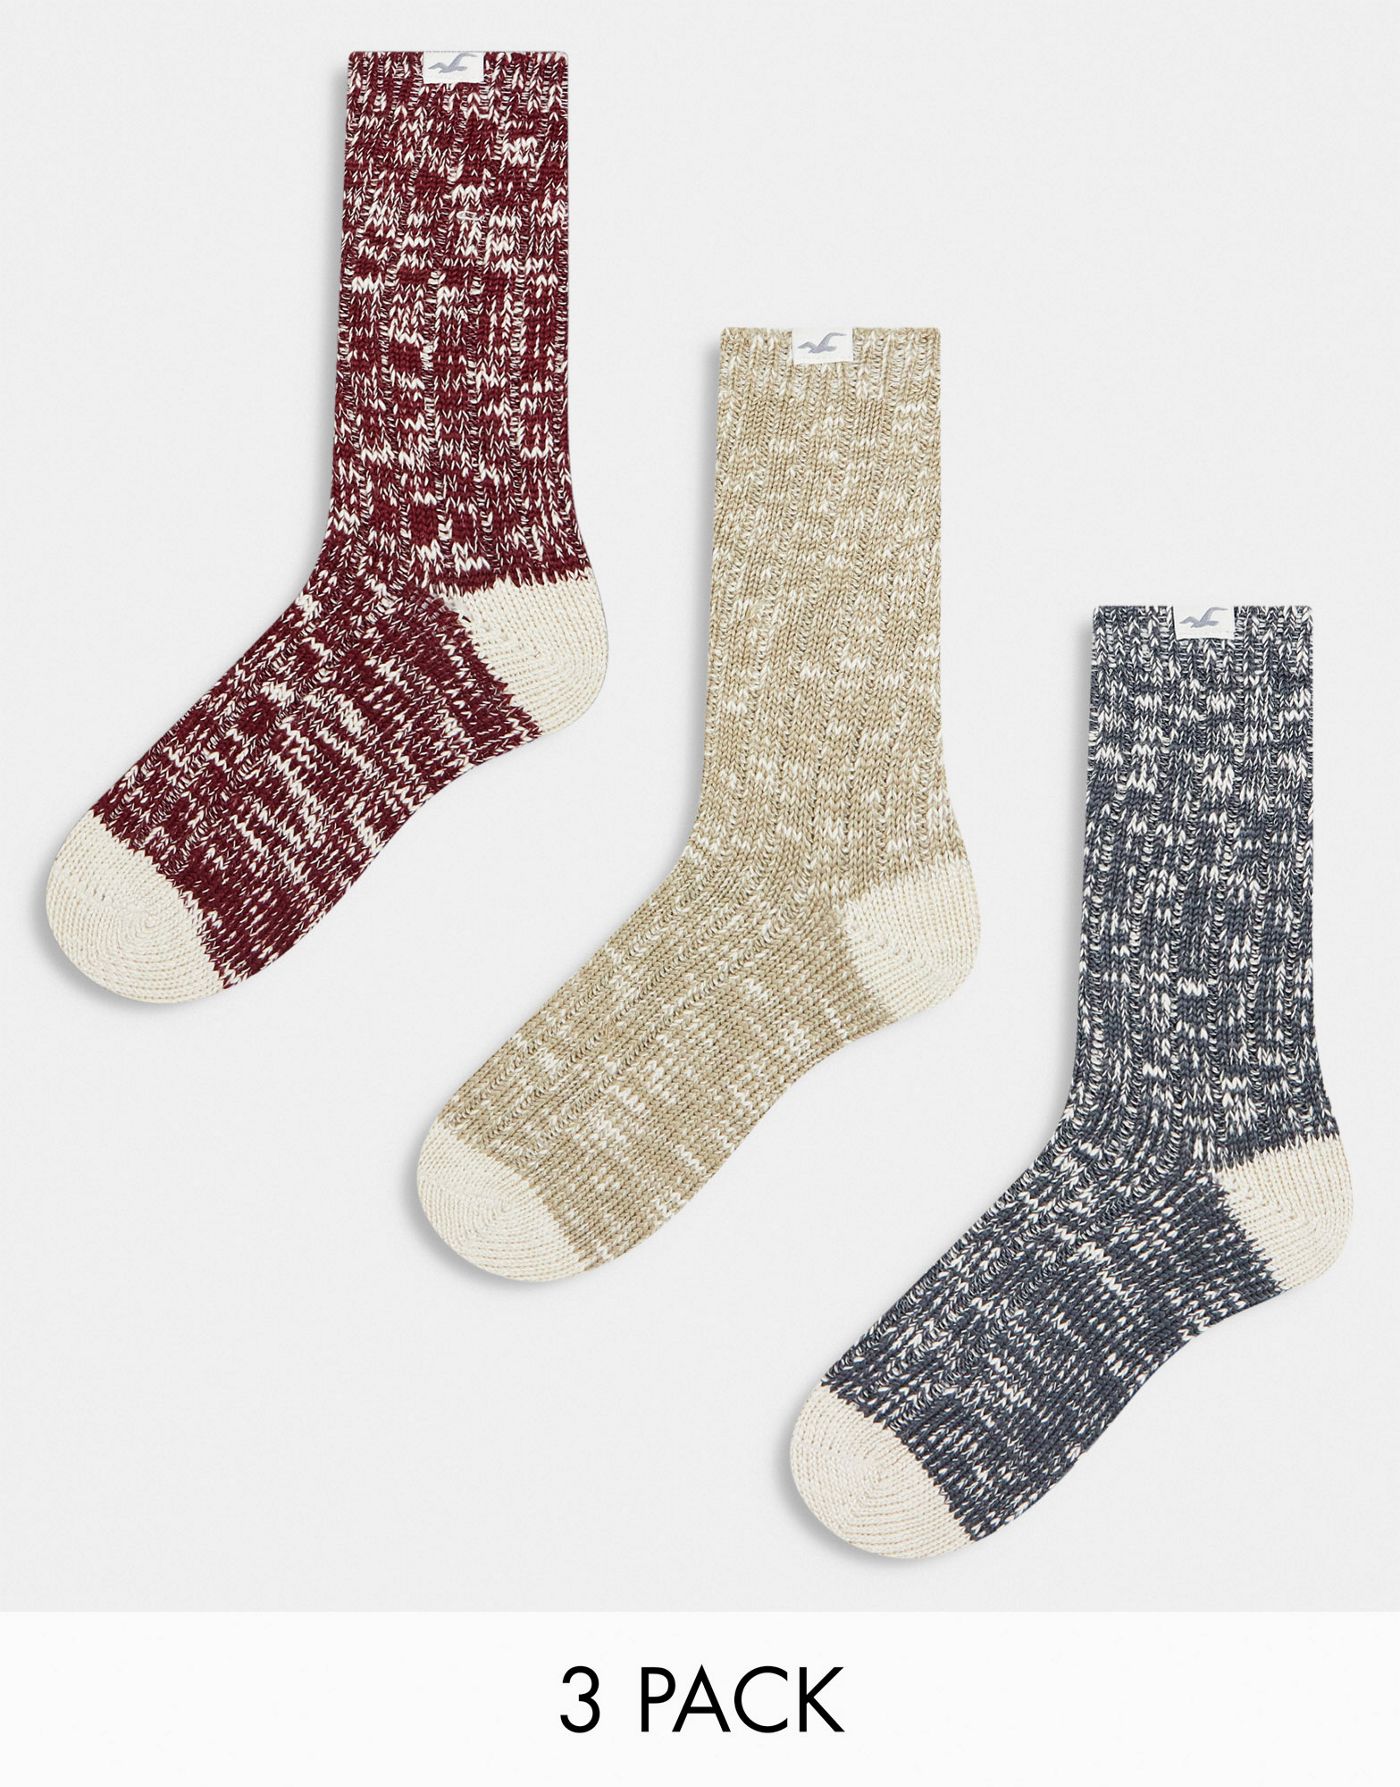 Hollister 3 pack camp cozy marl crew socks in grey/cream/red